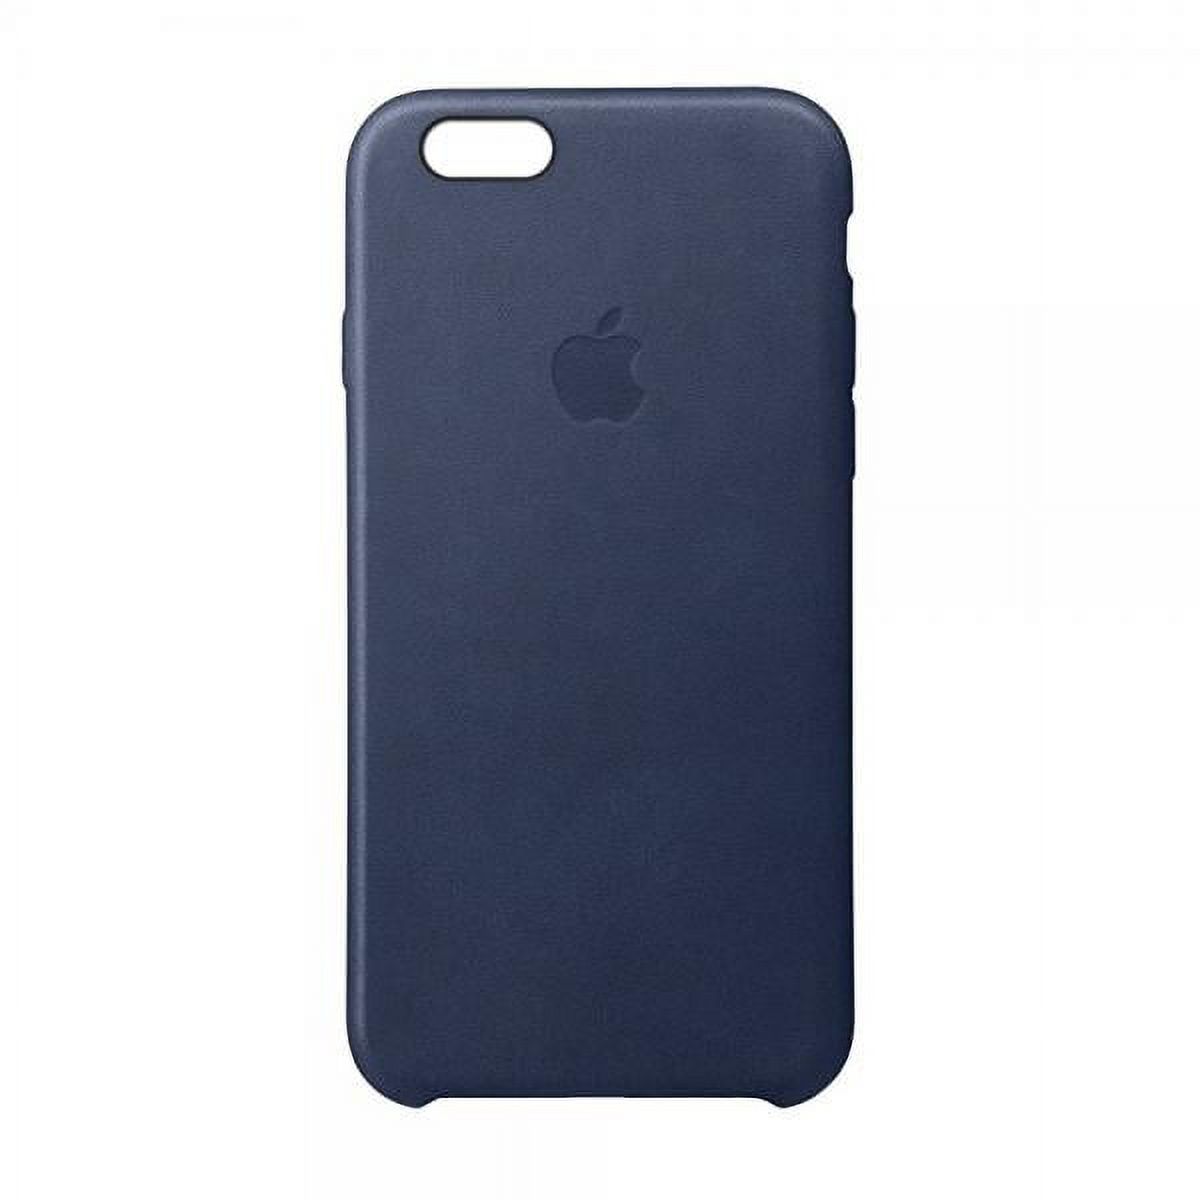 Apple Leather Case for iPhone 6s Plus and iPhone 6 Plus - Midnight Blue - image 1 of 9